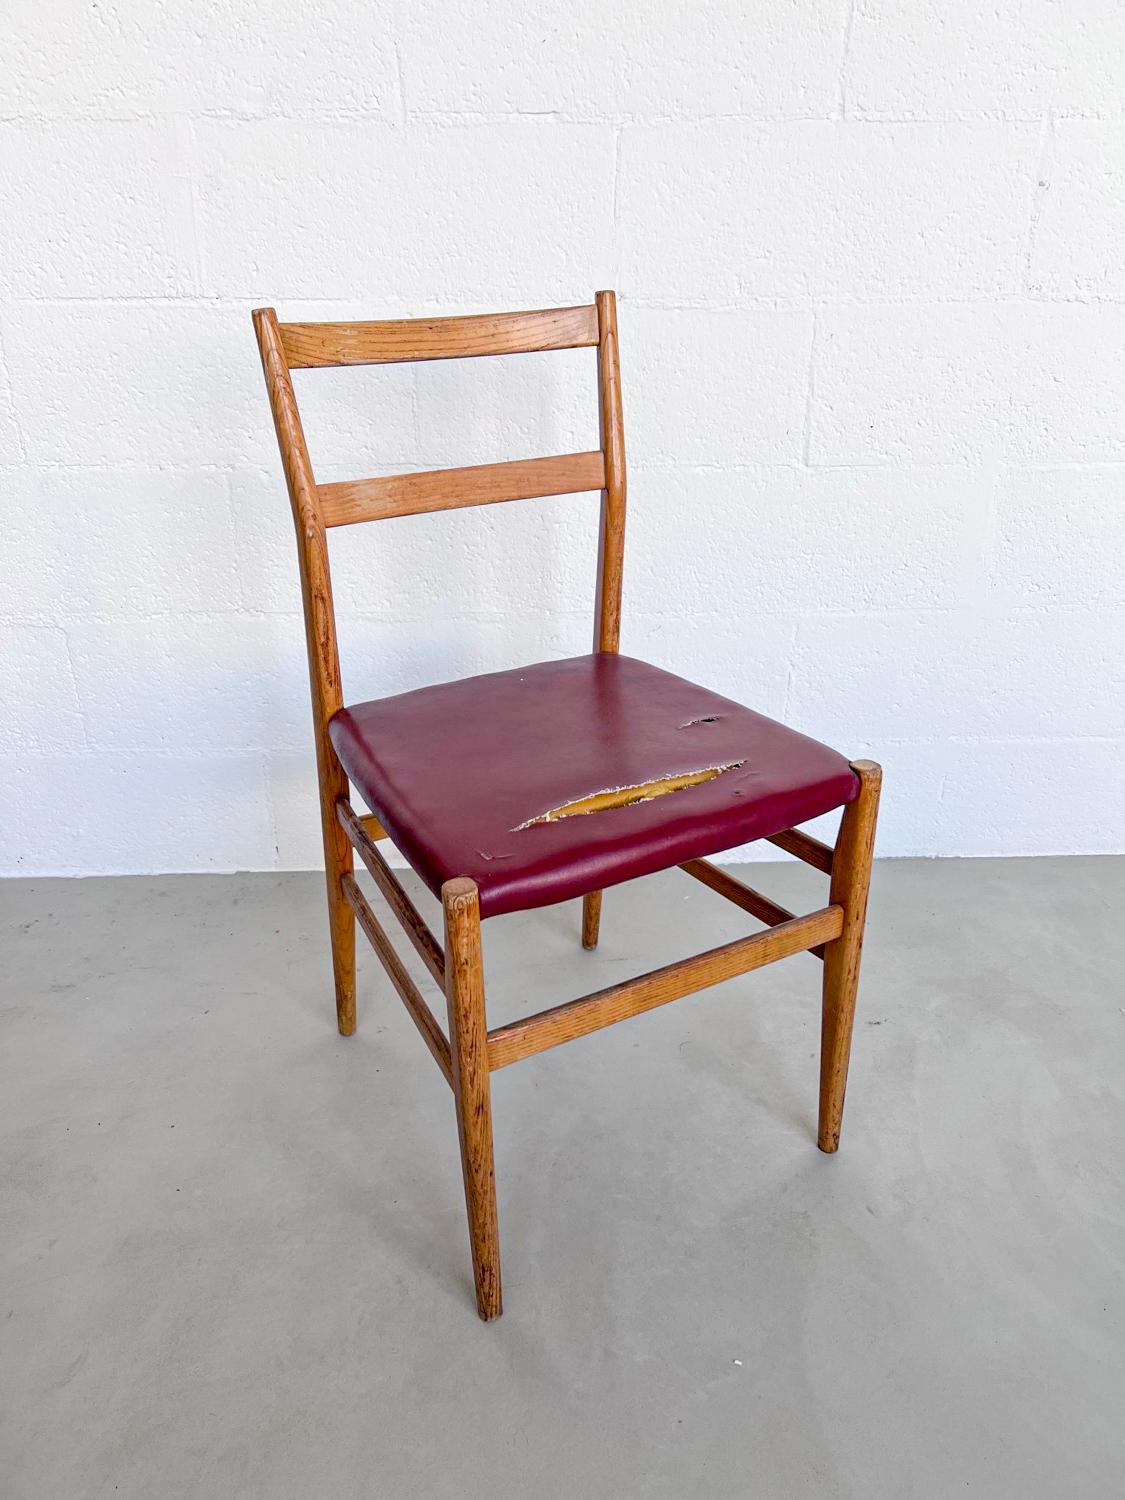 4 Vintage Collectible Italian Chairs by Gio Ponti

Giò Ponti needs no introduction: He's been arguably the most influential personality in Italian design and architecture for almost three decades, from the Fifties throughout the Seventies. In his